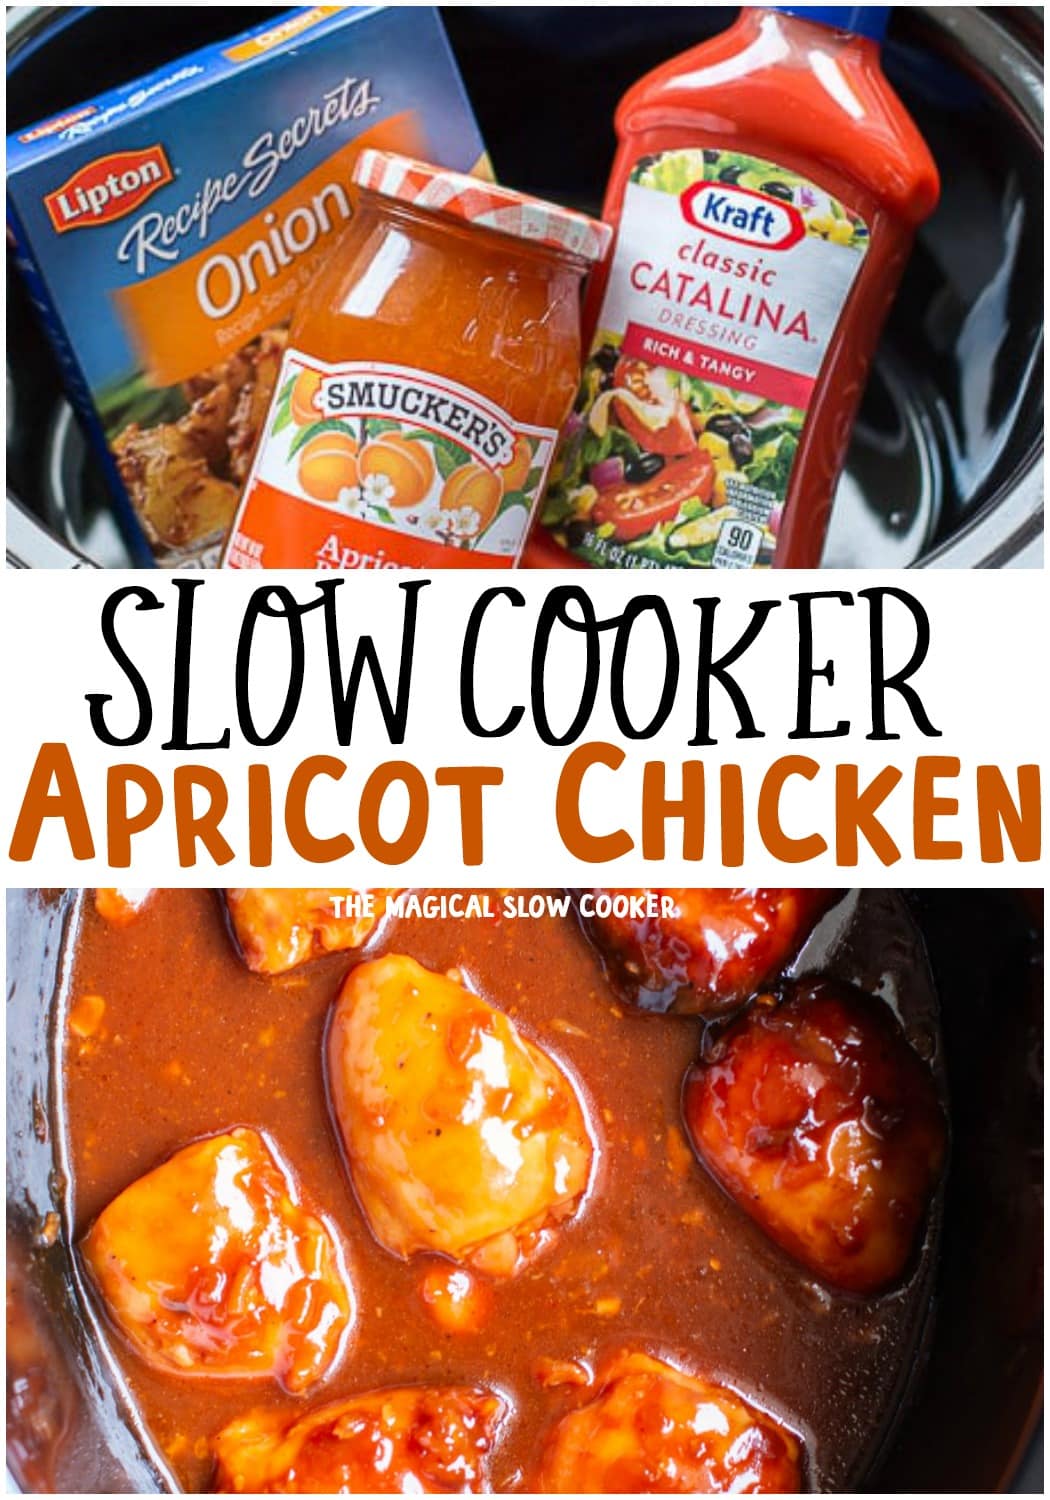 Slow Cooker Apricot Chicken - The Magical Slow Cooker